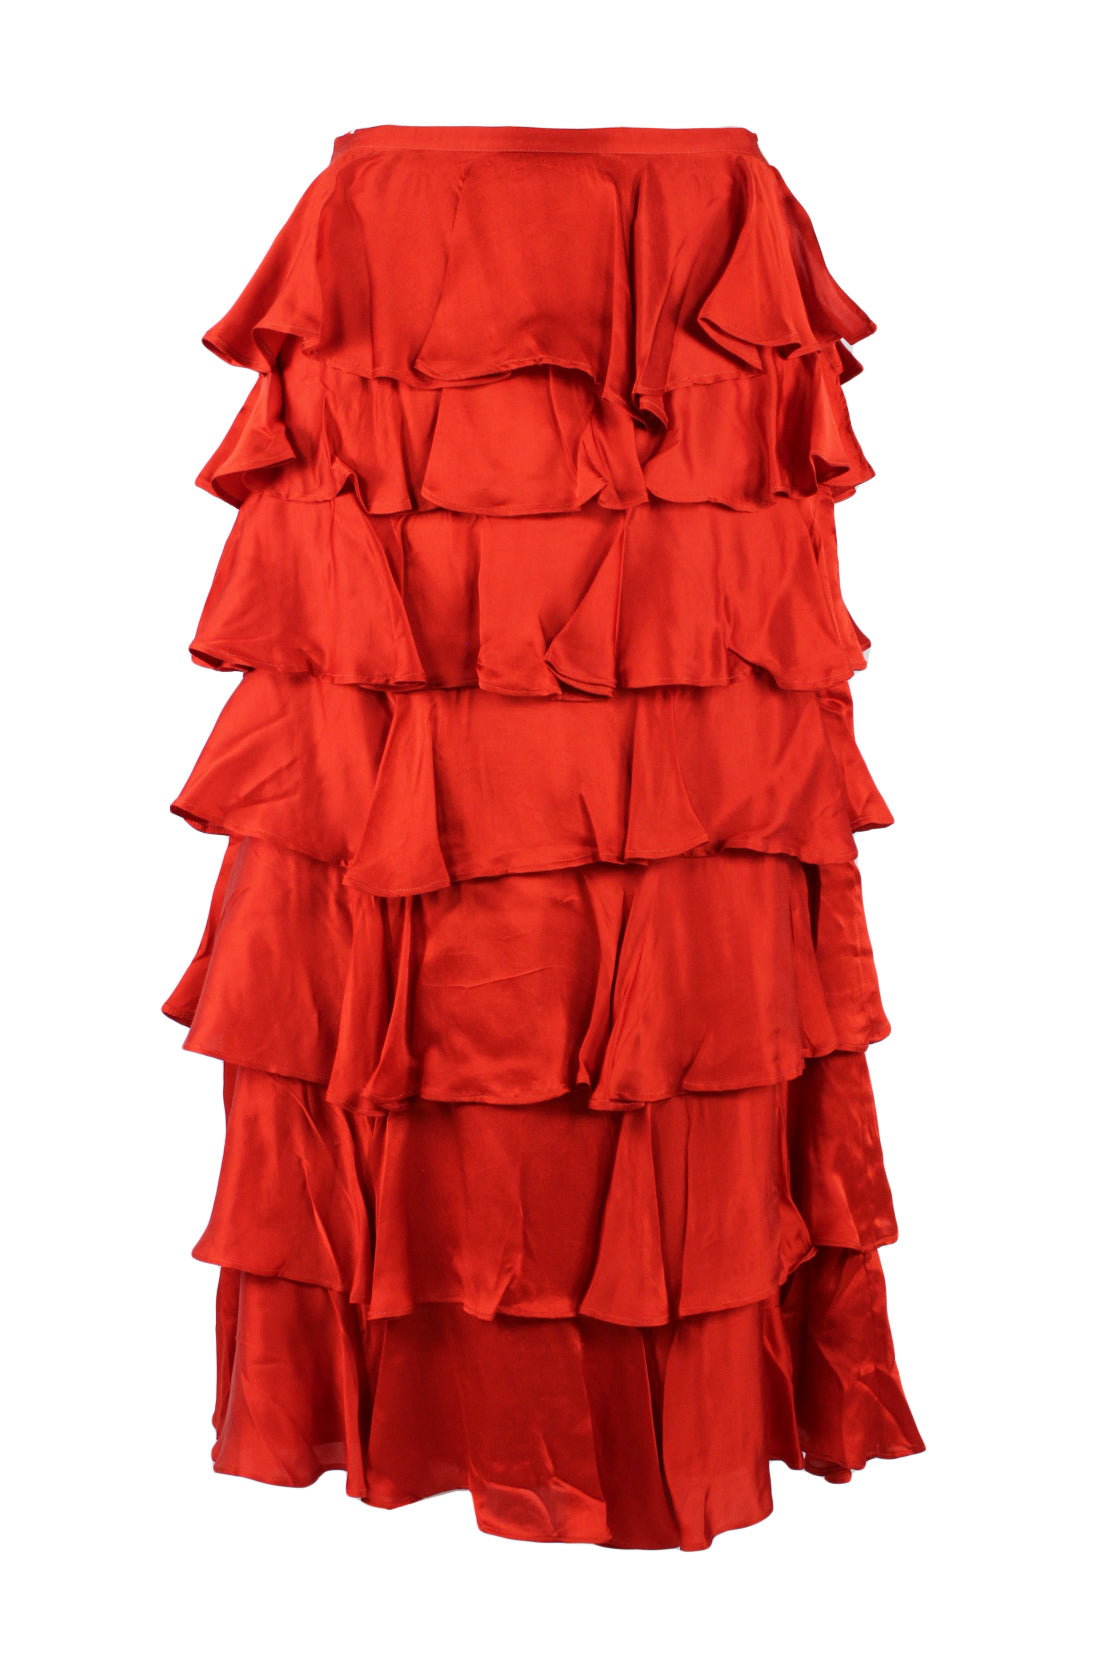 description: alix of bohemia red tiered ruffle maxi skirt. features zipper closure at left side with button closure, high rise, and a-line silhouette. 